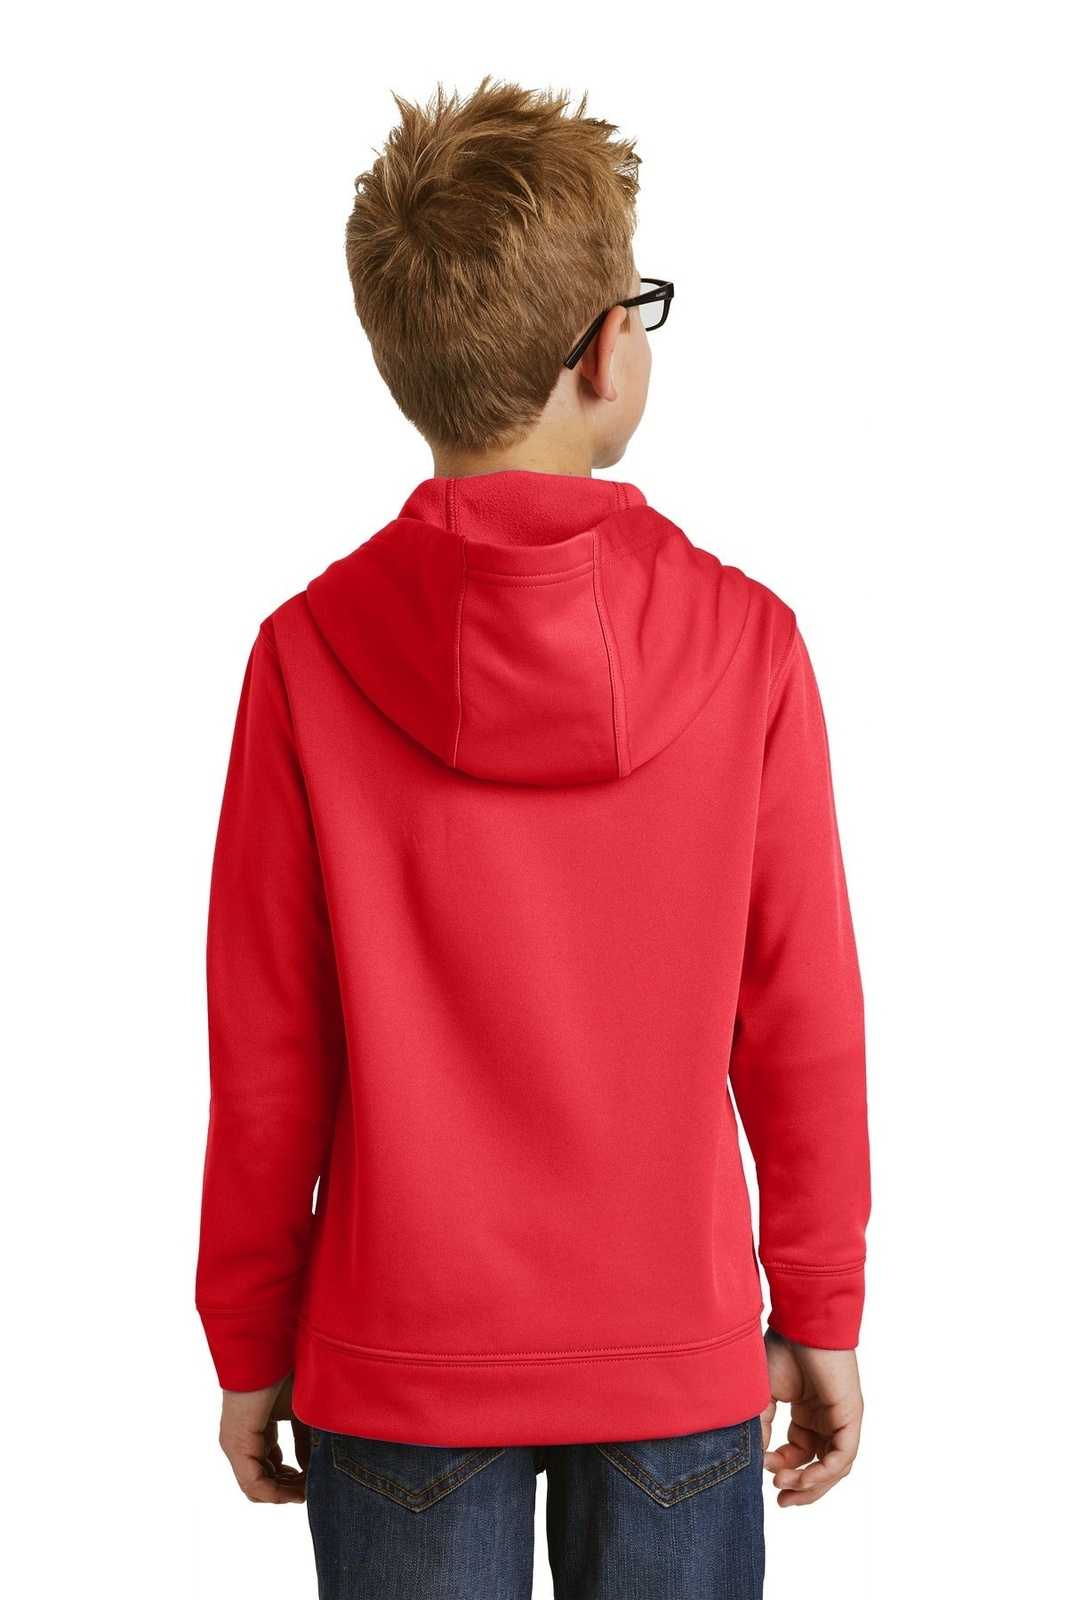 Port &amp; Company PC590YH Youth Performance Fleece Pullover Hooded Sweatshirt - Red - HIT a Double - 2